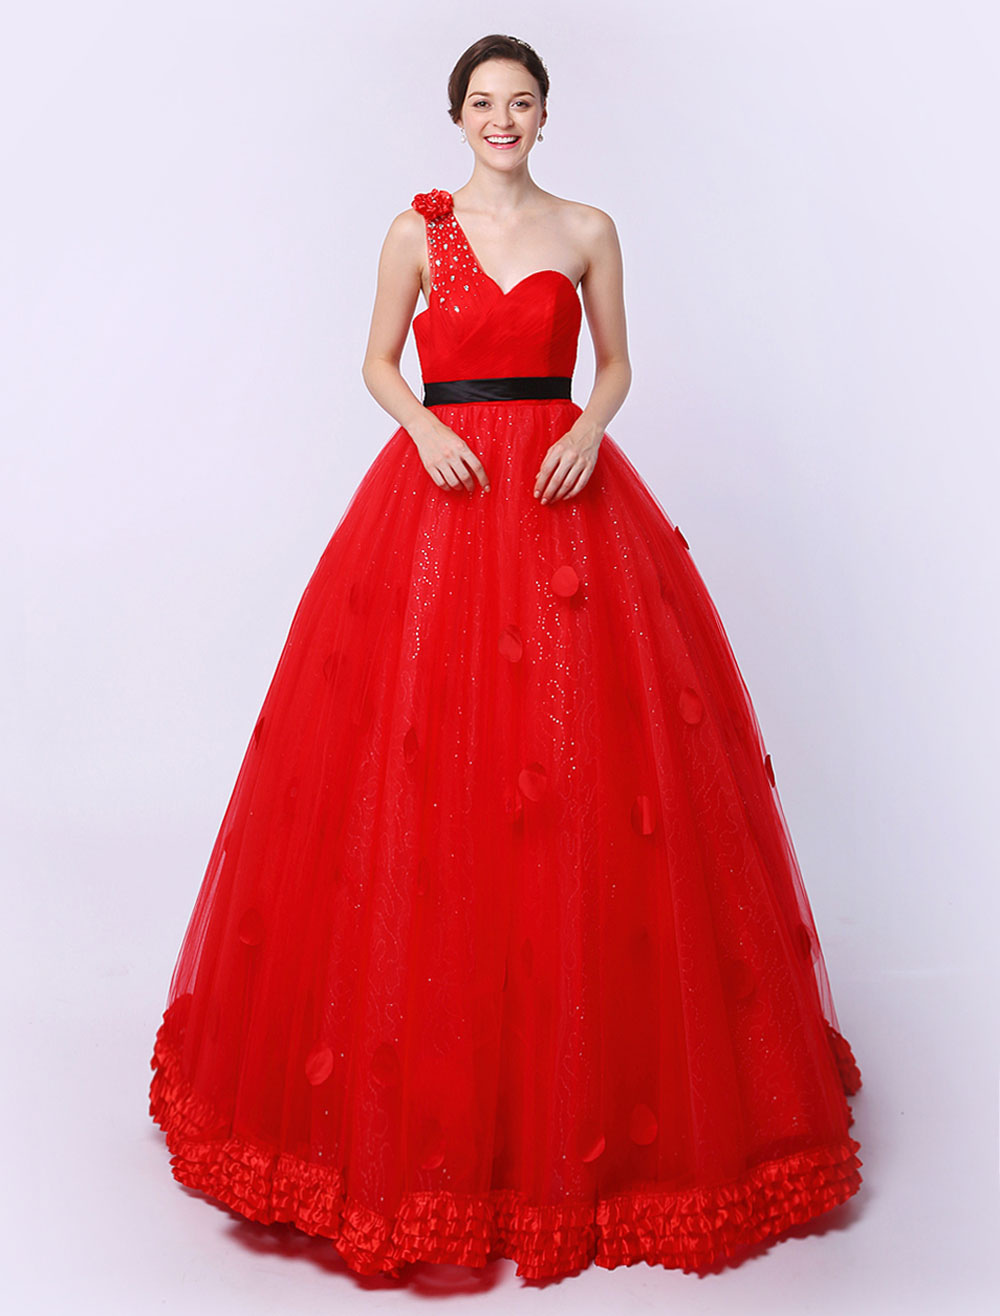 Sweet Red Floor-Length Quinceanera Dress with Ball Gown Tulle Flower (Wedding Quinceanera Dresses) photo